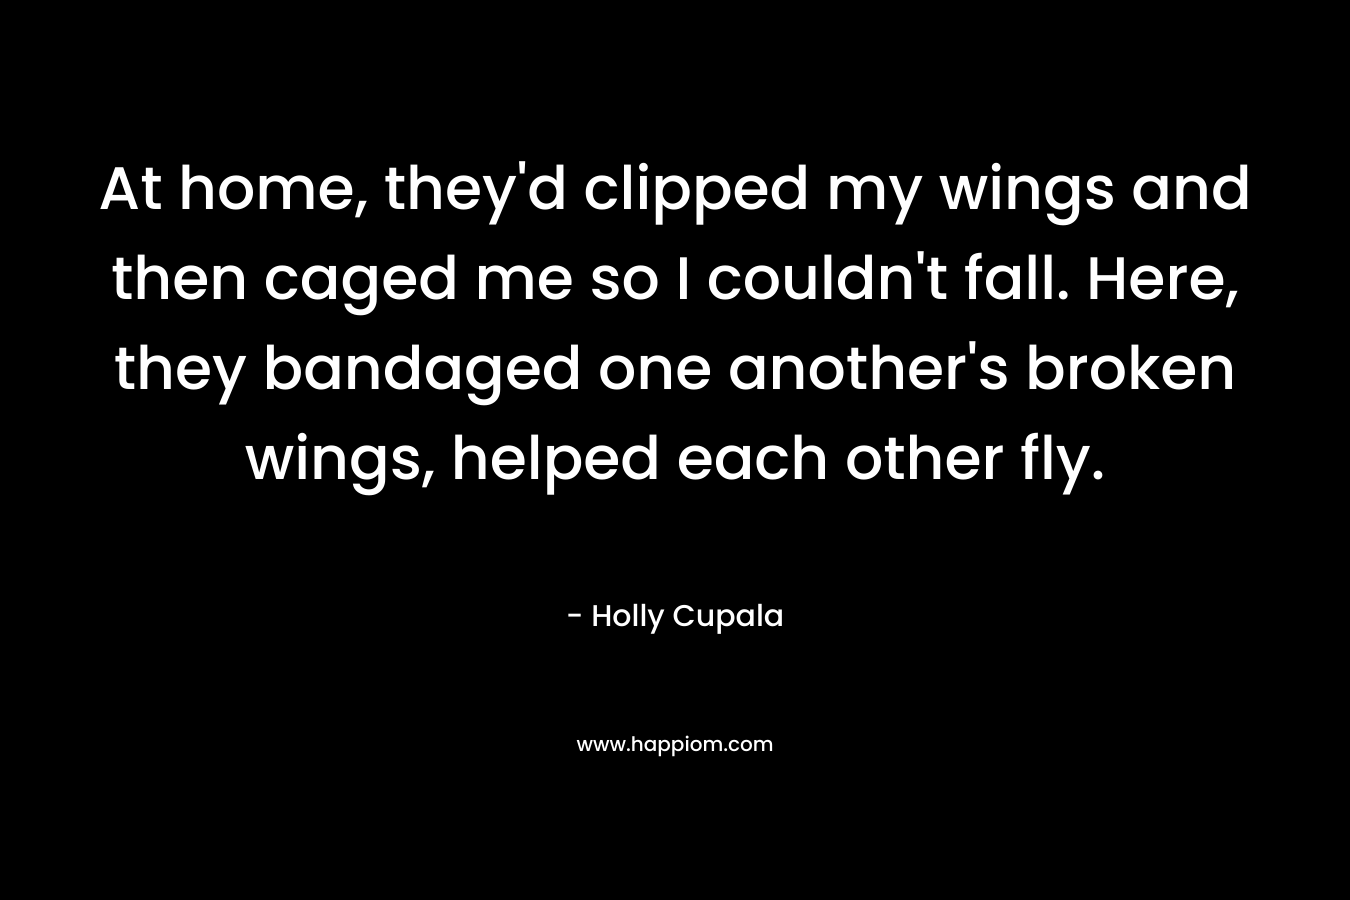 At home, they'd clipped my wings and then caged me so I couldn't fall. Here, they bandaged one another's broken wings, helped each other fly.